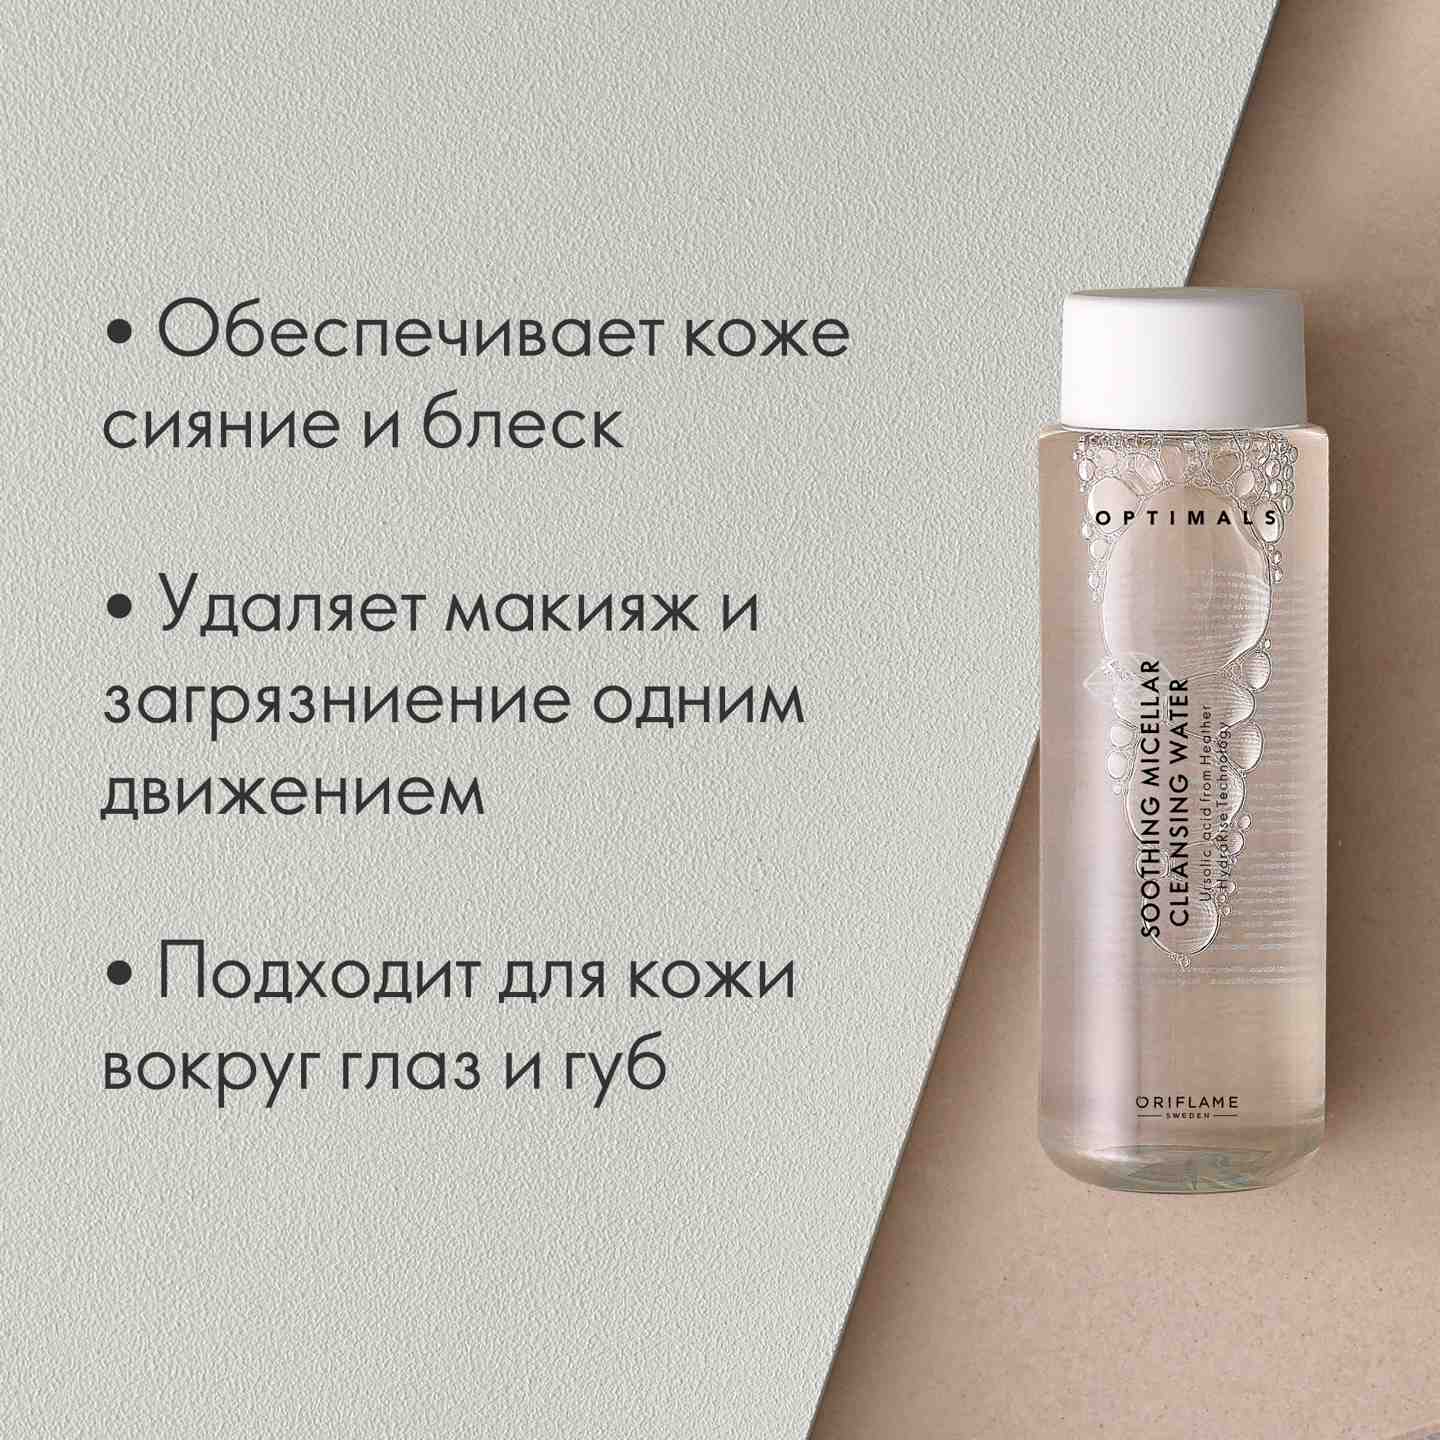 https://media-cdn.oriflame.com/productImage?externalMediaId=product-management-media%2fProducts%2f42610%2fAZ%2f42610_4.png&id=15087749&version=1